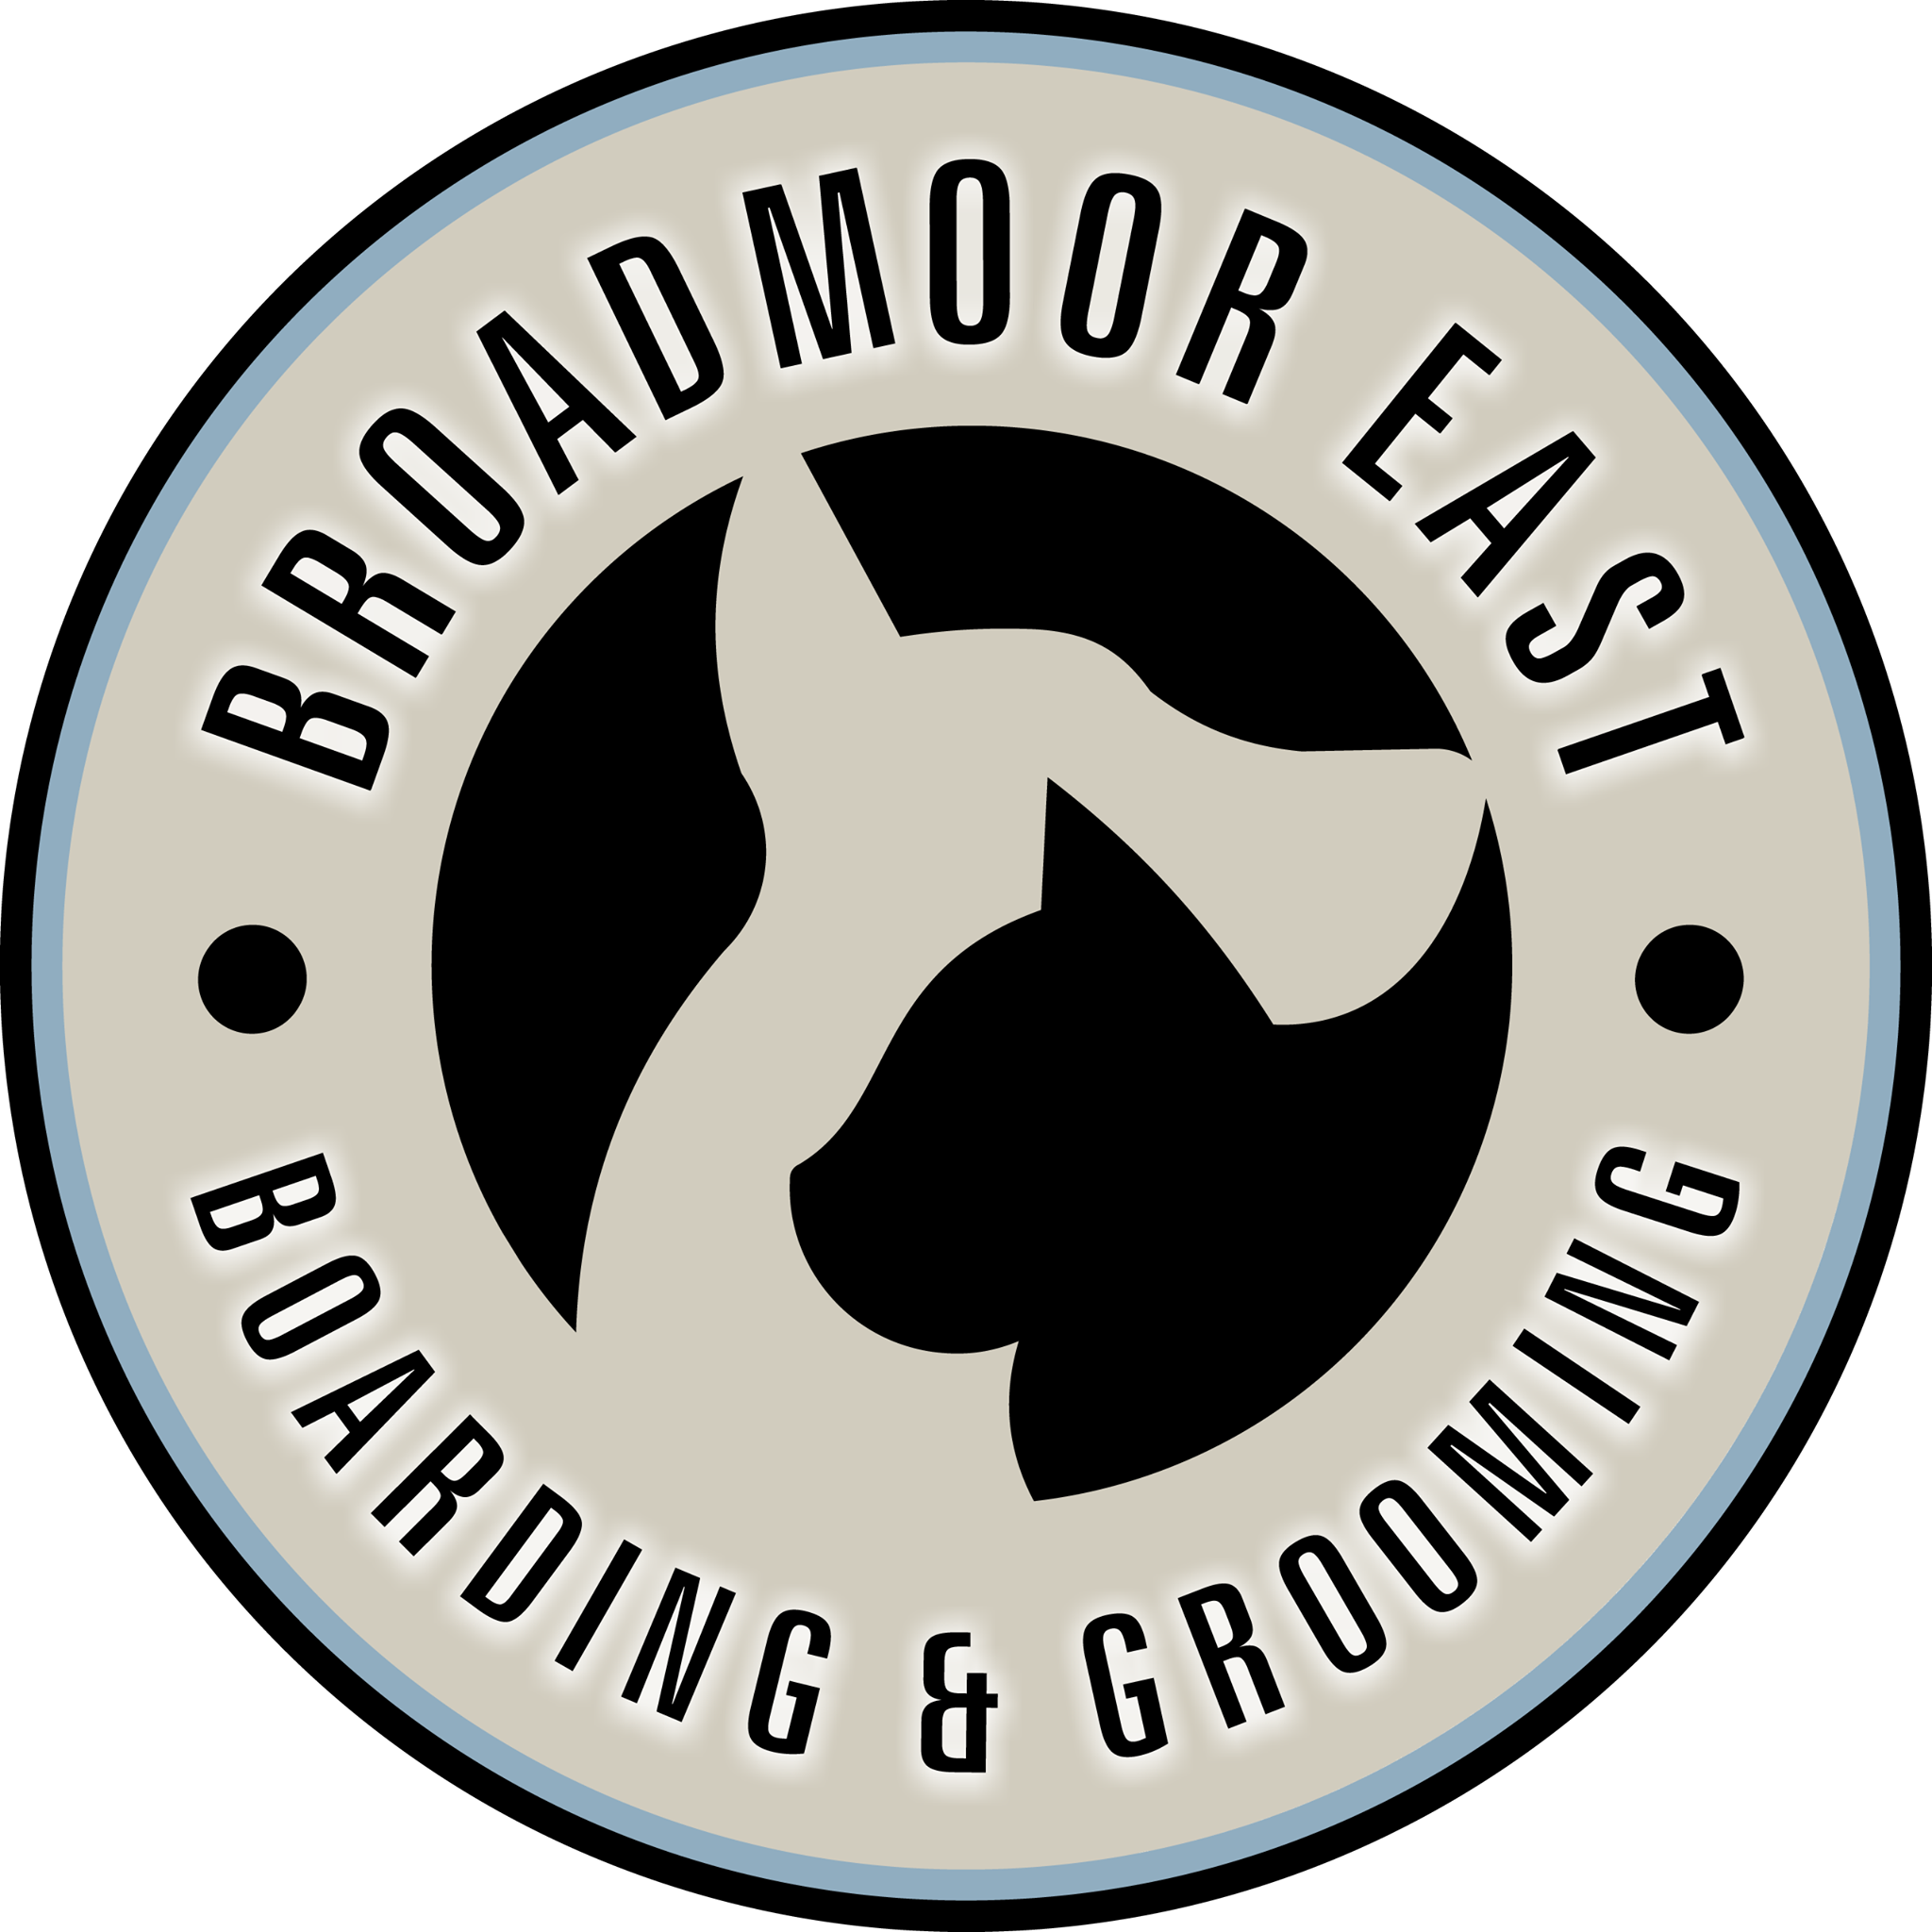 Company logo of Broadmoor Biscuit Bar & Boutique